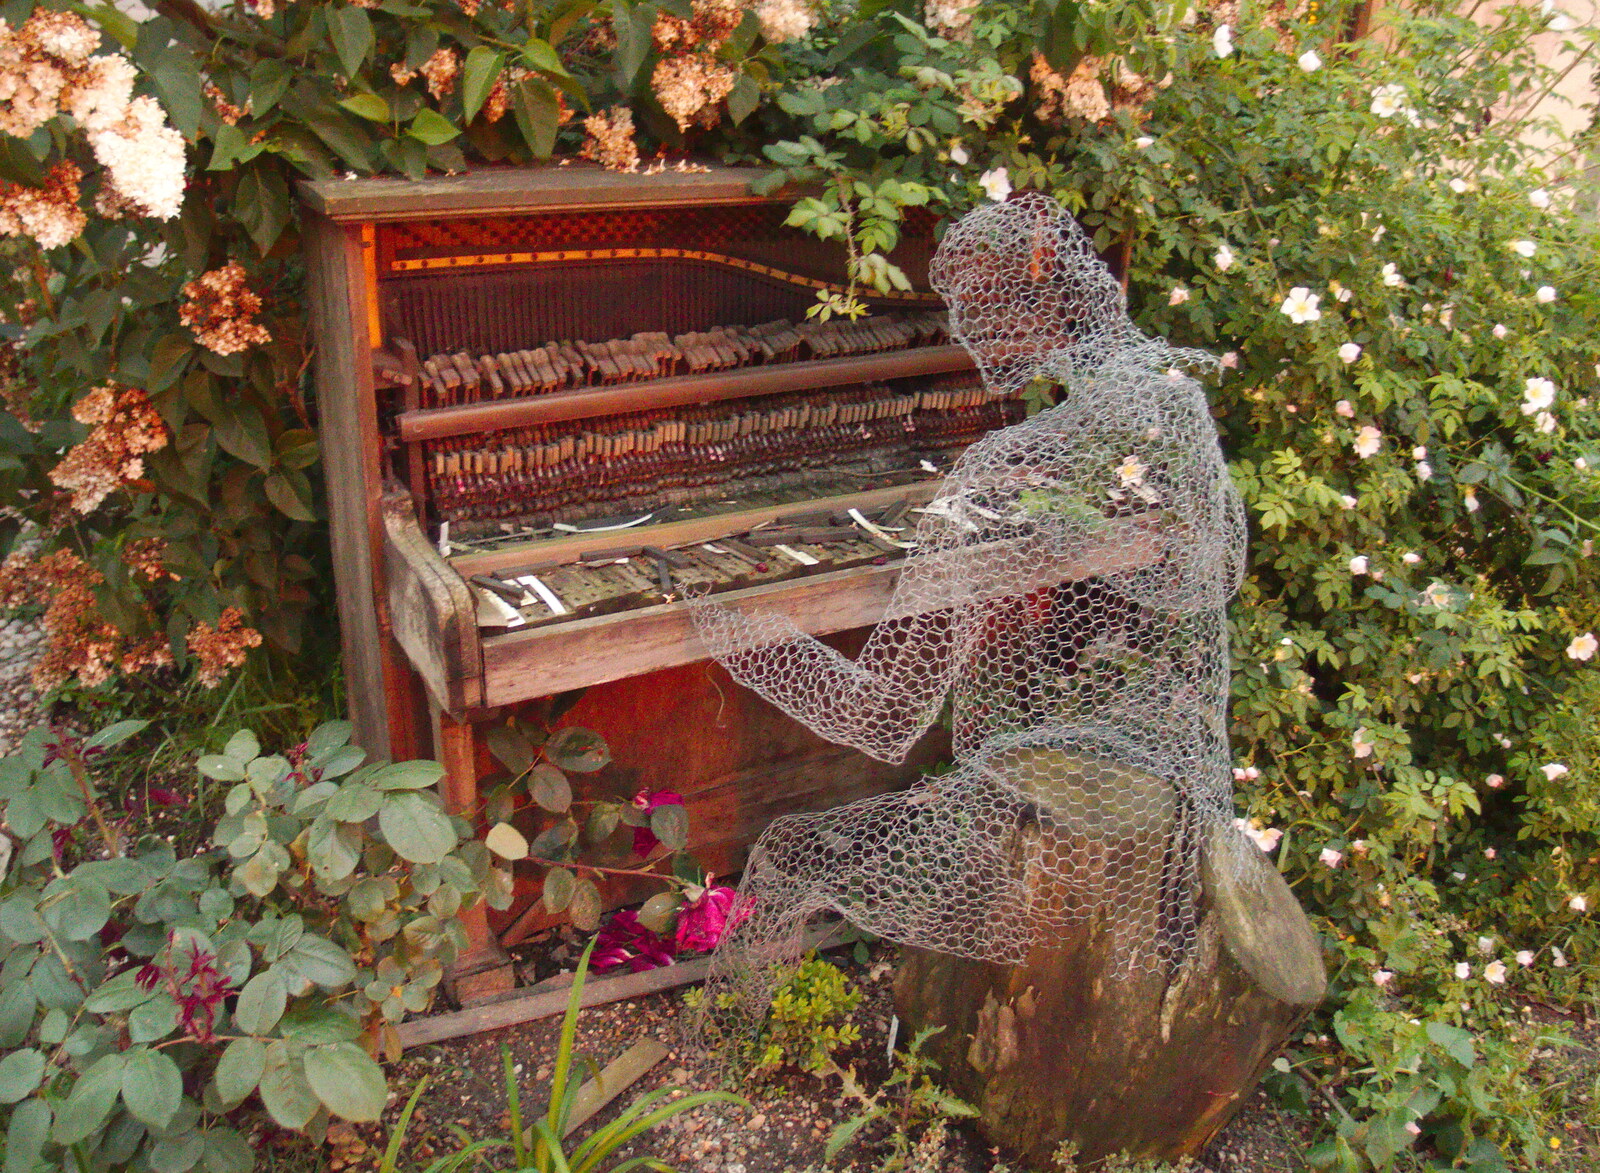 The BSCC at the Railway Tavern, Mellis, Suffolk - 28th May 2014: There's a chicken-wire figure playing a derelict piano